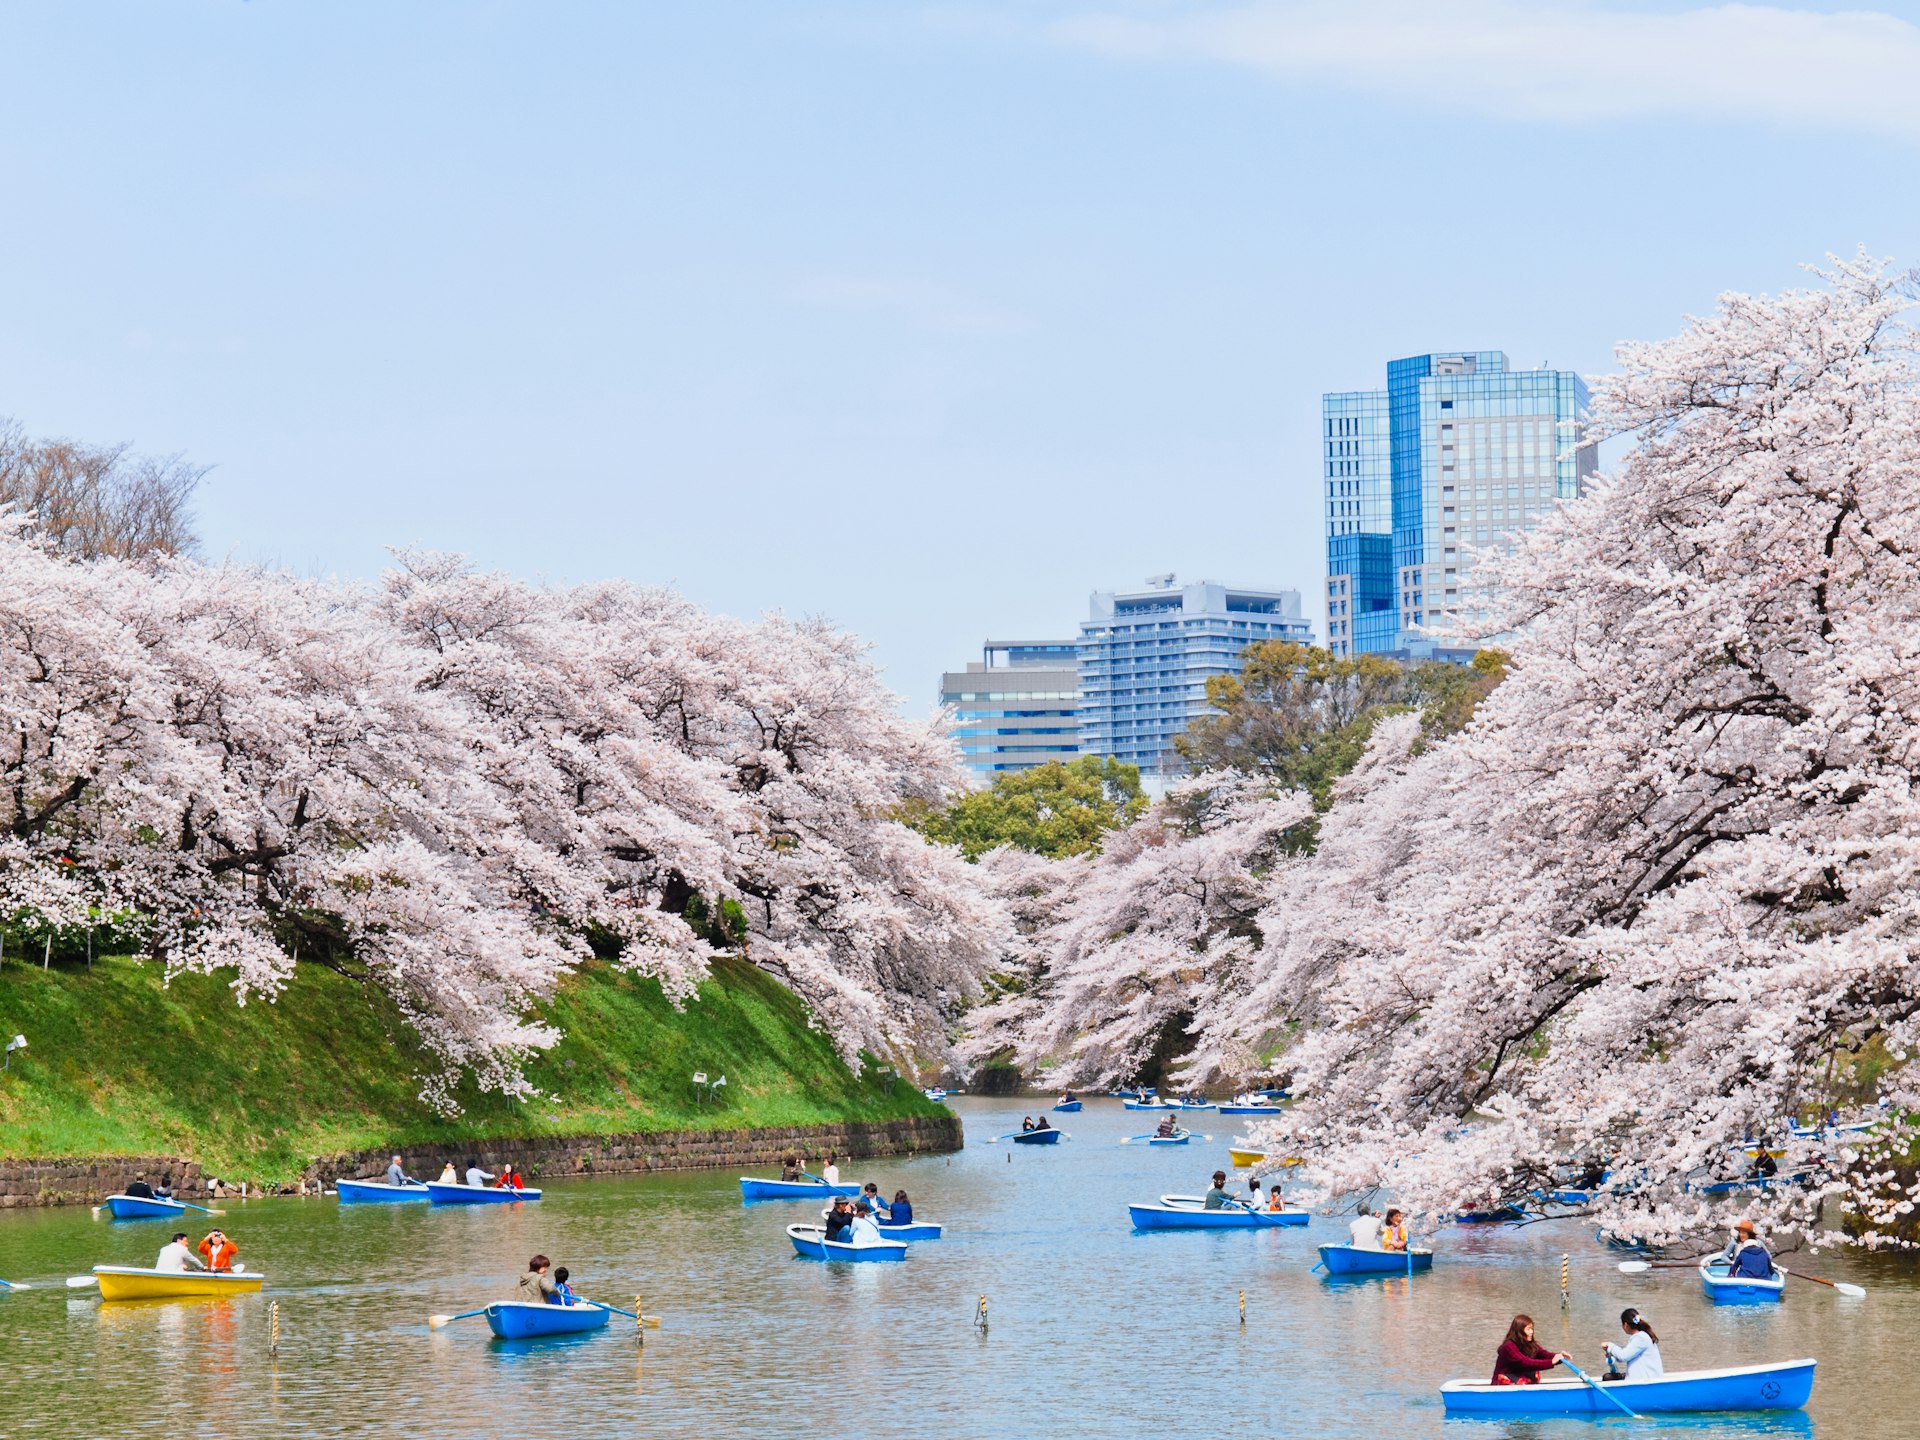 A waterway with several recreational boats. The area is surrounded by cherry blossom trees that are in full bloom with delicate pink petals